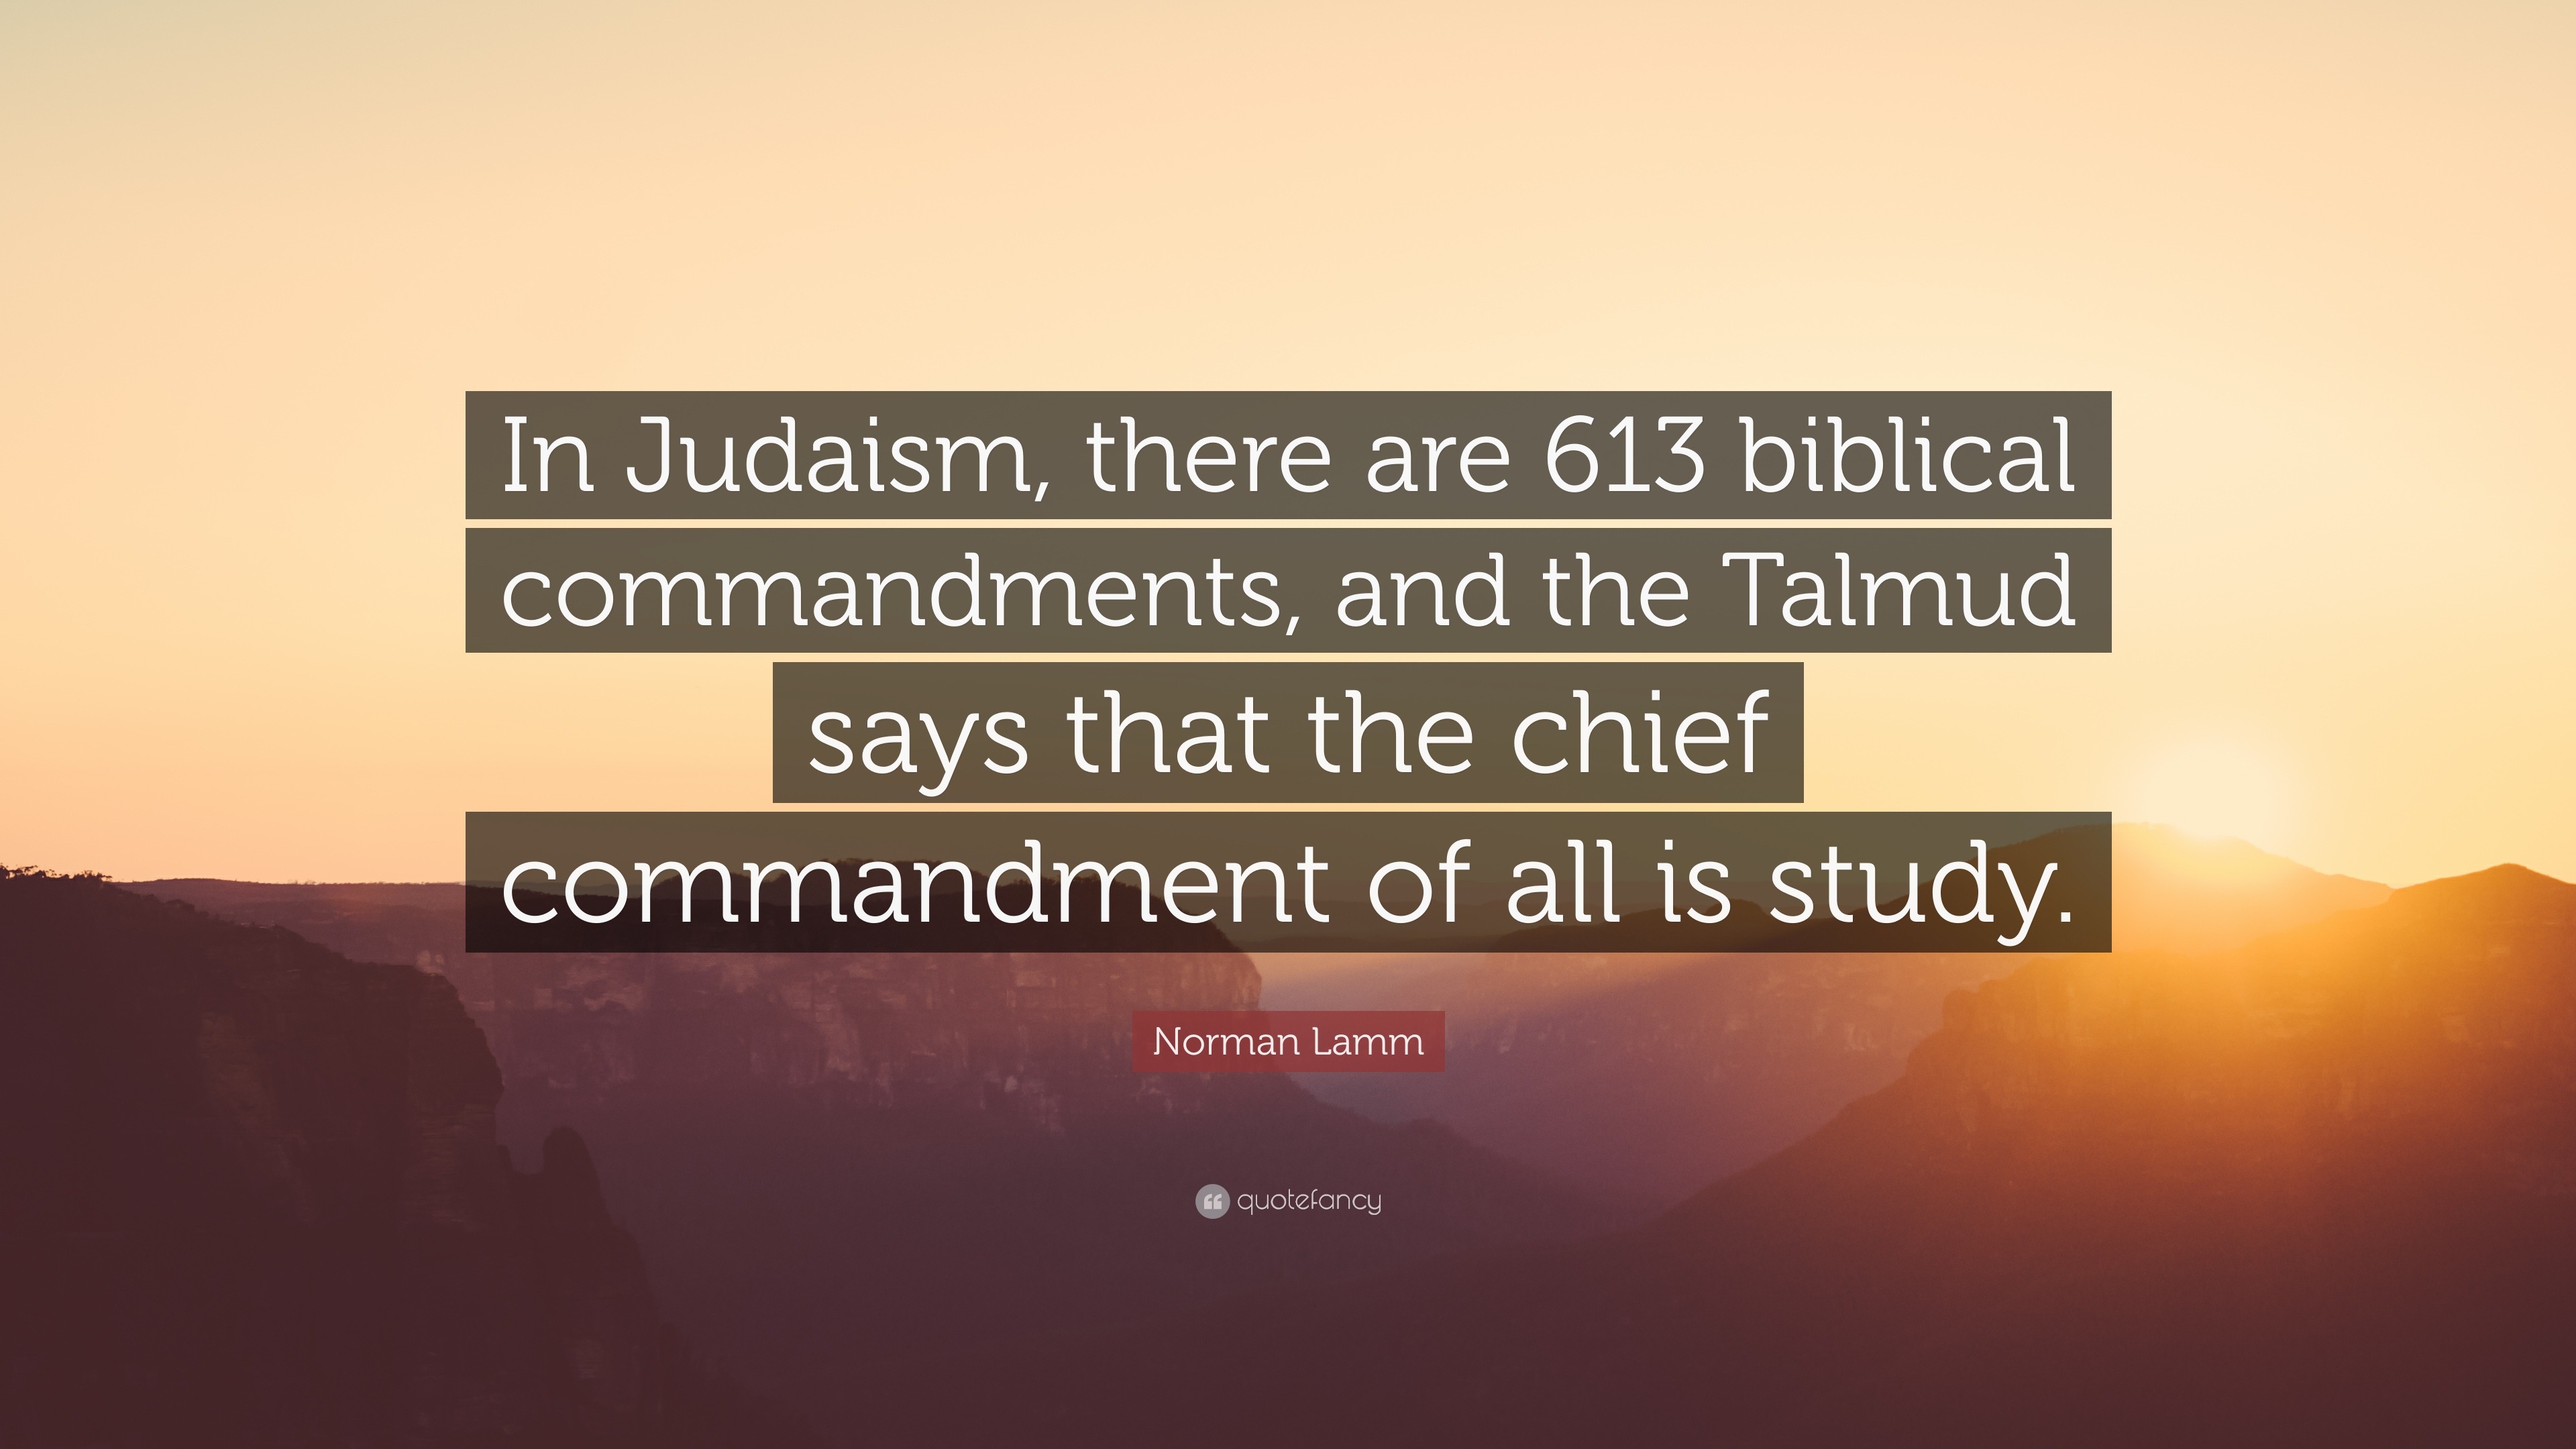 norman lamm quote: “in judaism, there are 613 biblical commandments